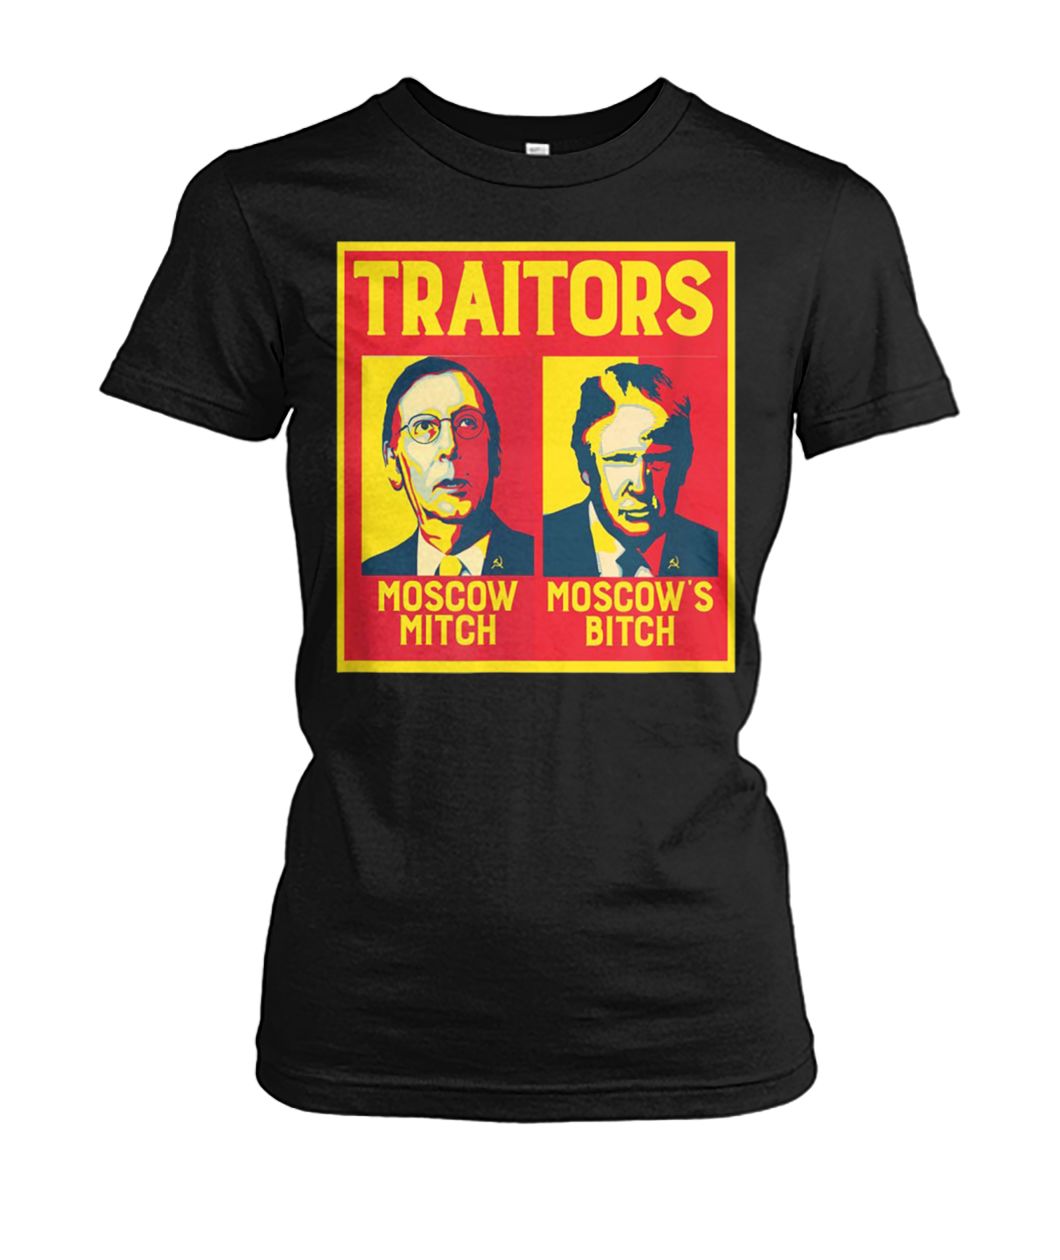 Traitors ditch moscow mitch moscow's bitch women's crew tee